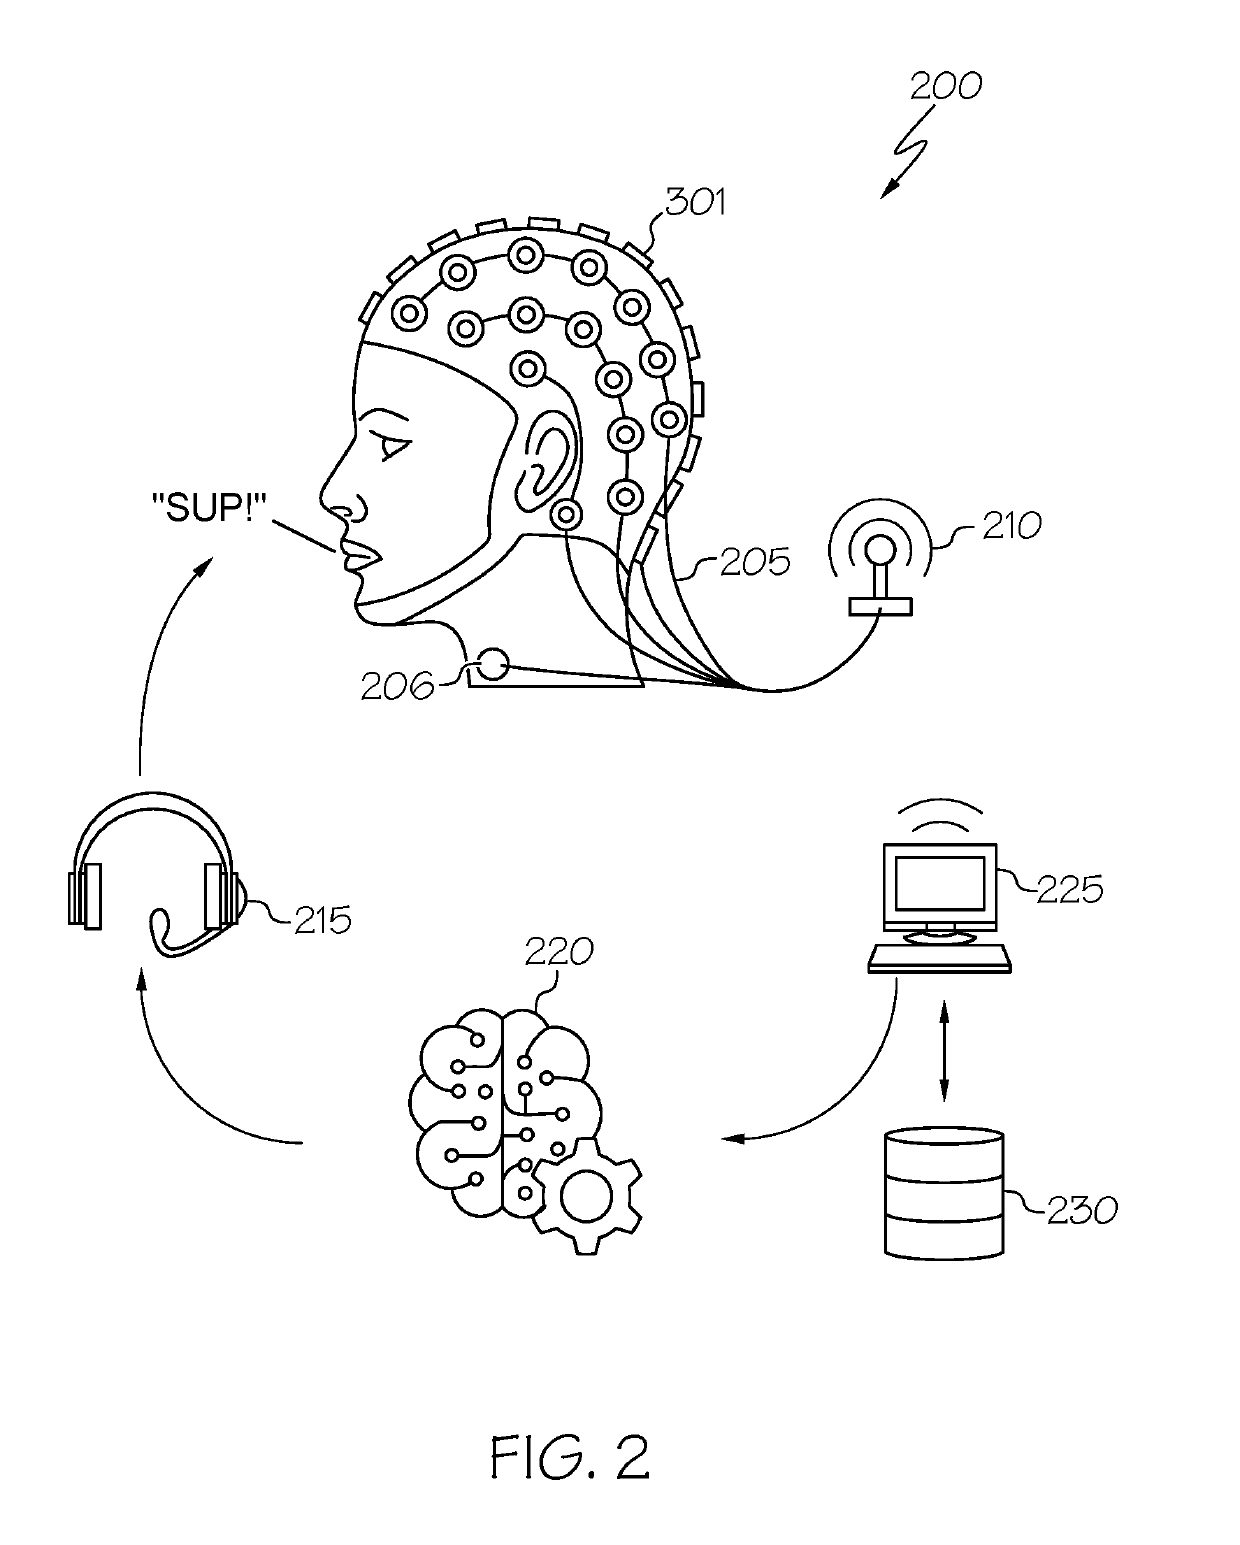 Methods, systems and apparatuses for inner voice recovery from neural activation relating to sub-vocalization